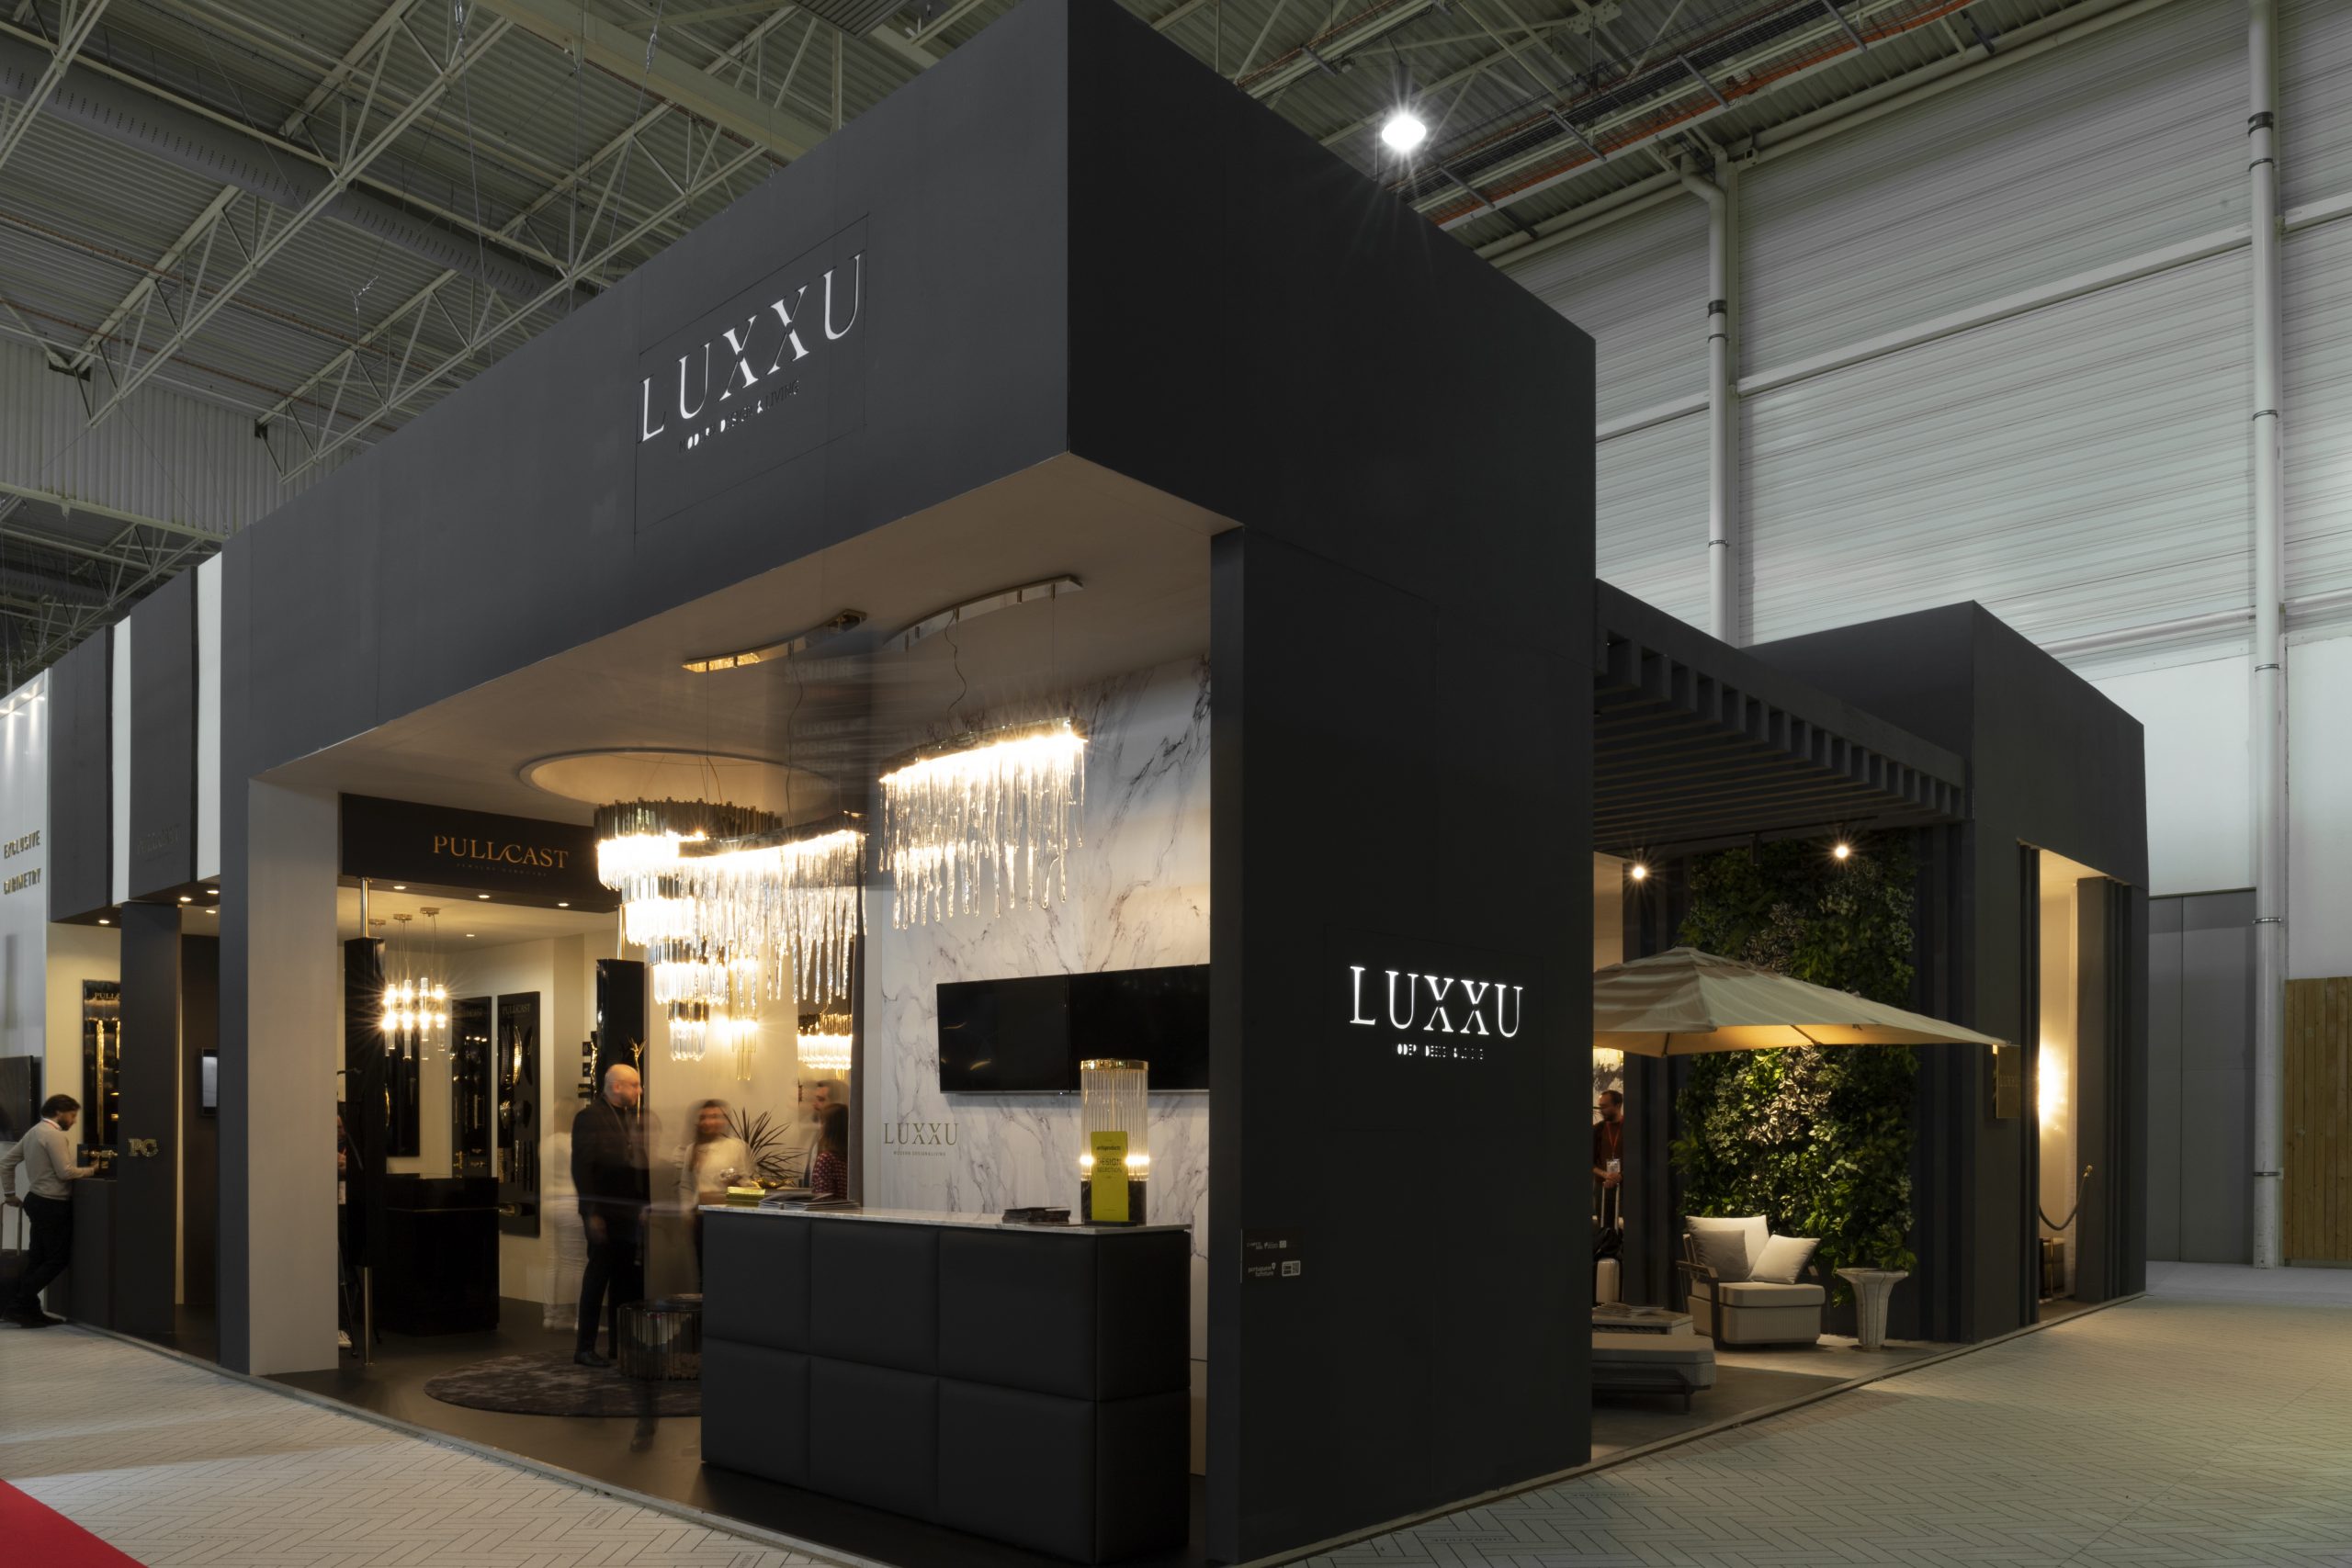 Maison et Objet Paris: A Throwback To LUXXU's Stand In 2020